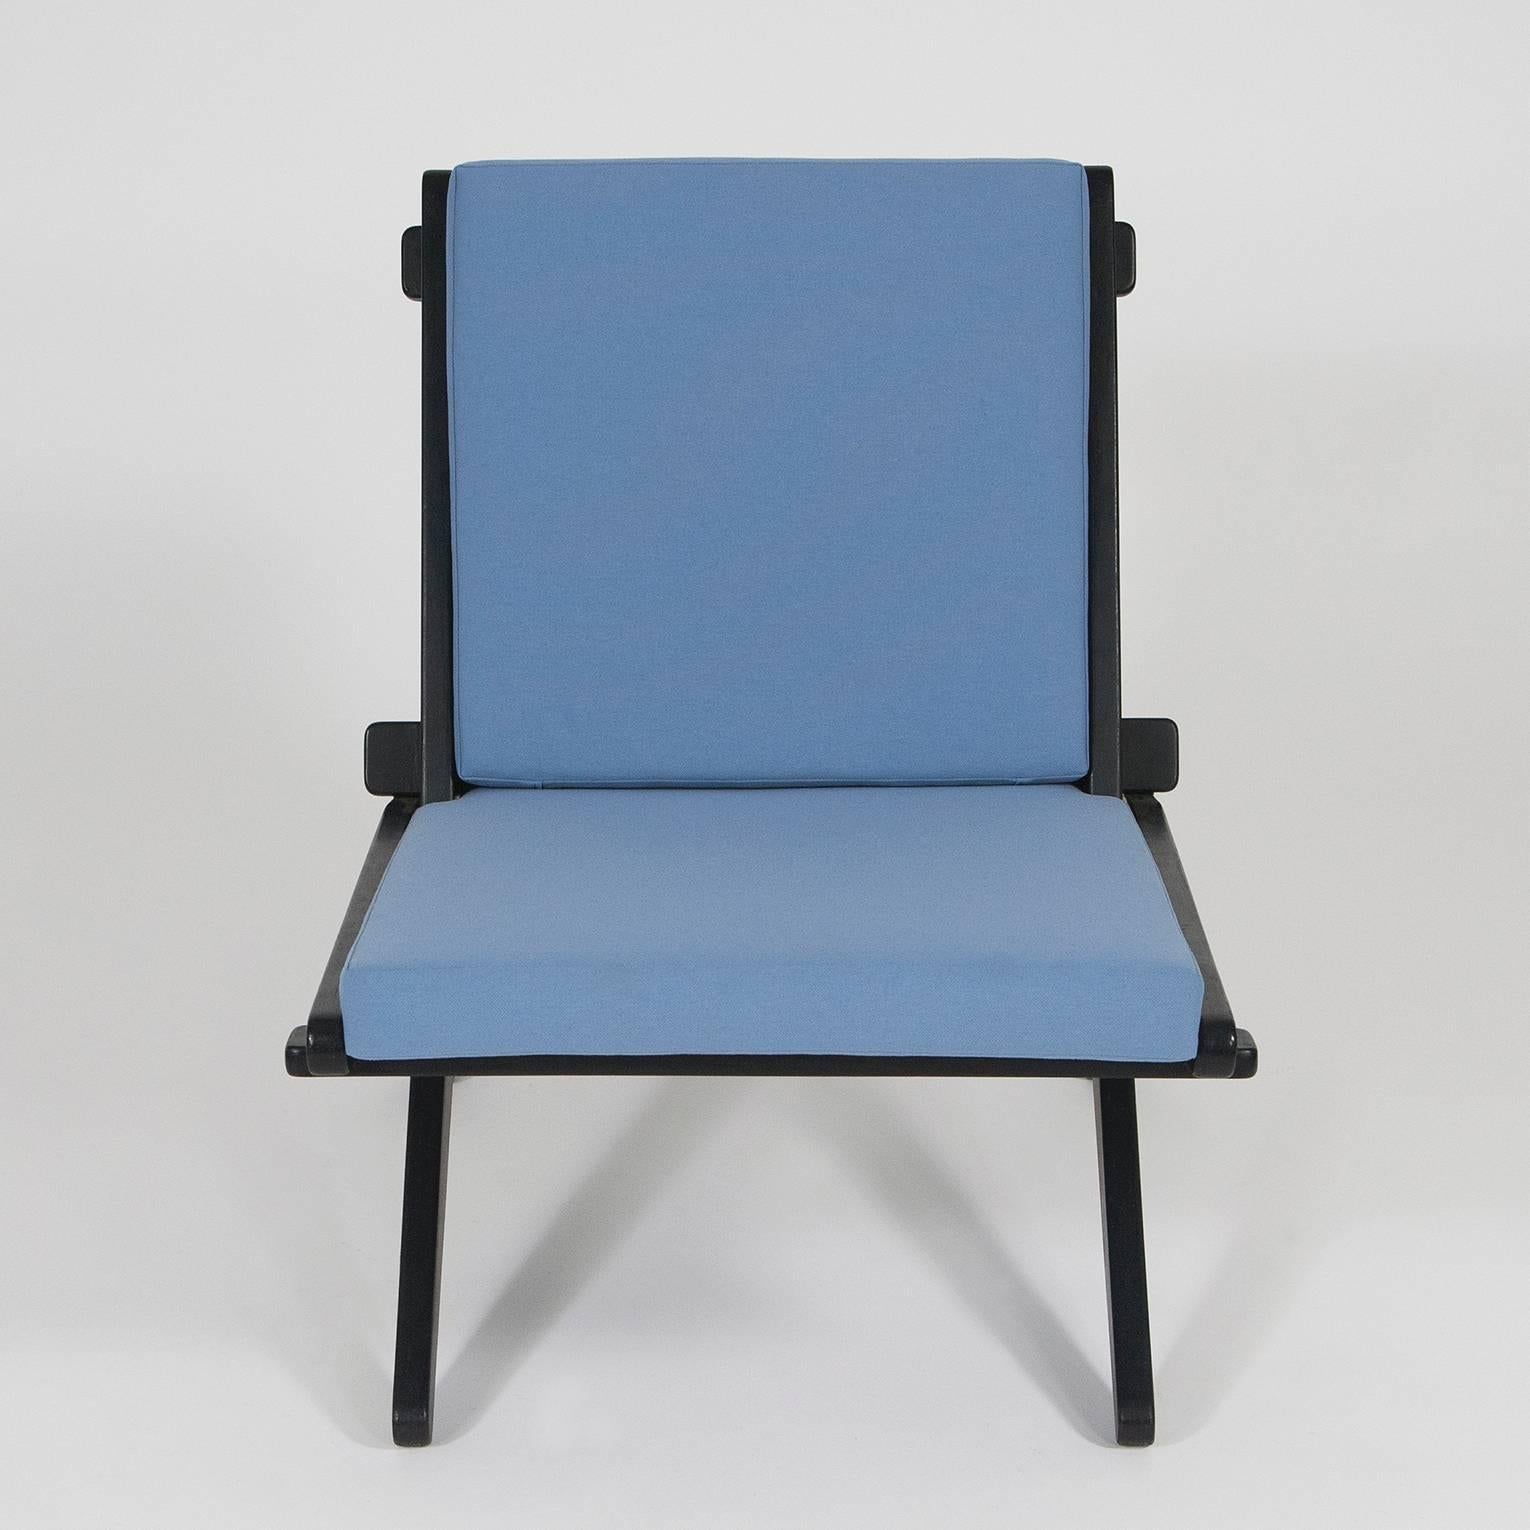 Mid-20th Century Danish Design Lounge Chair, 1950s For Sale